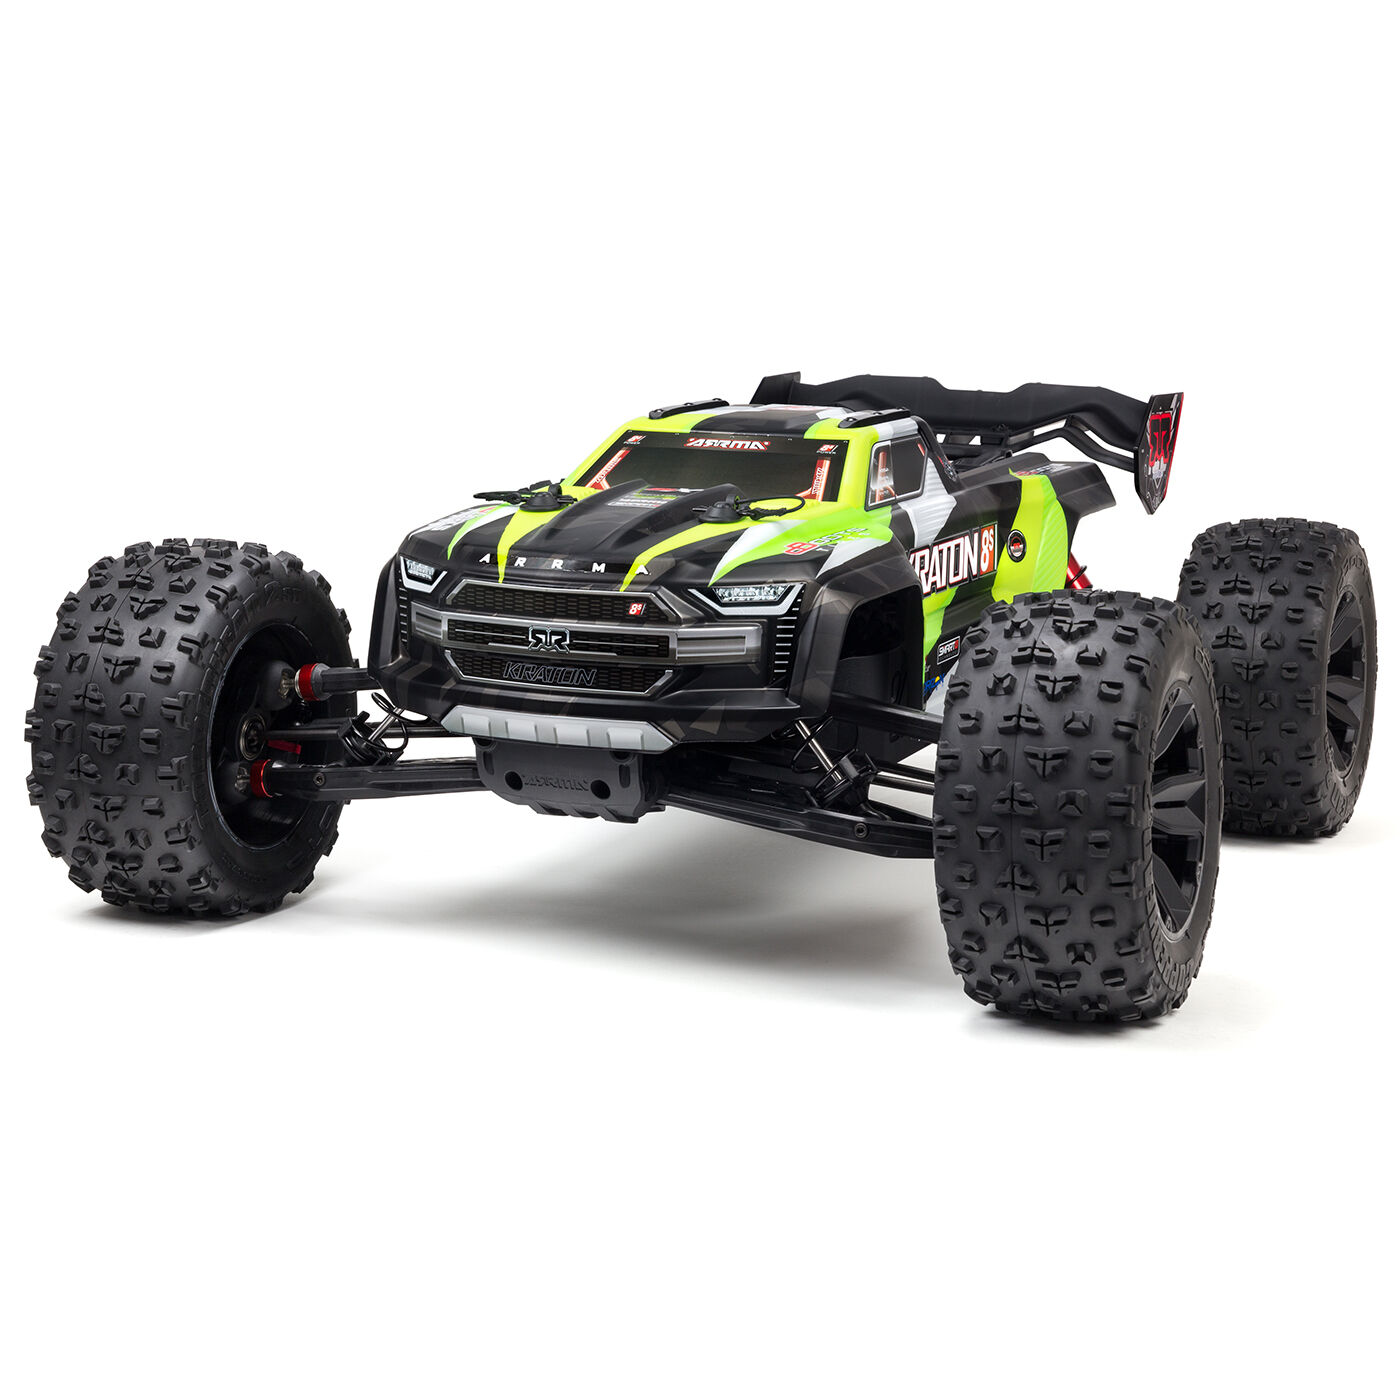 ARRMA KRATON 8S BLX RC4WD 1/5 MONSTER TRUCK GPM Racing in lega posteriore Knuckle arms 